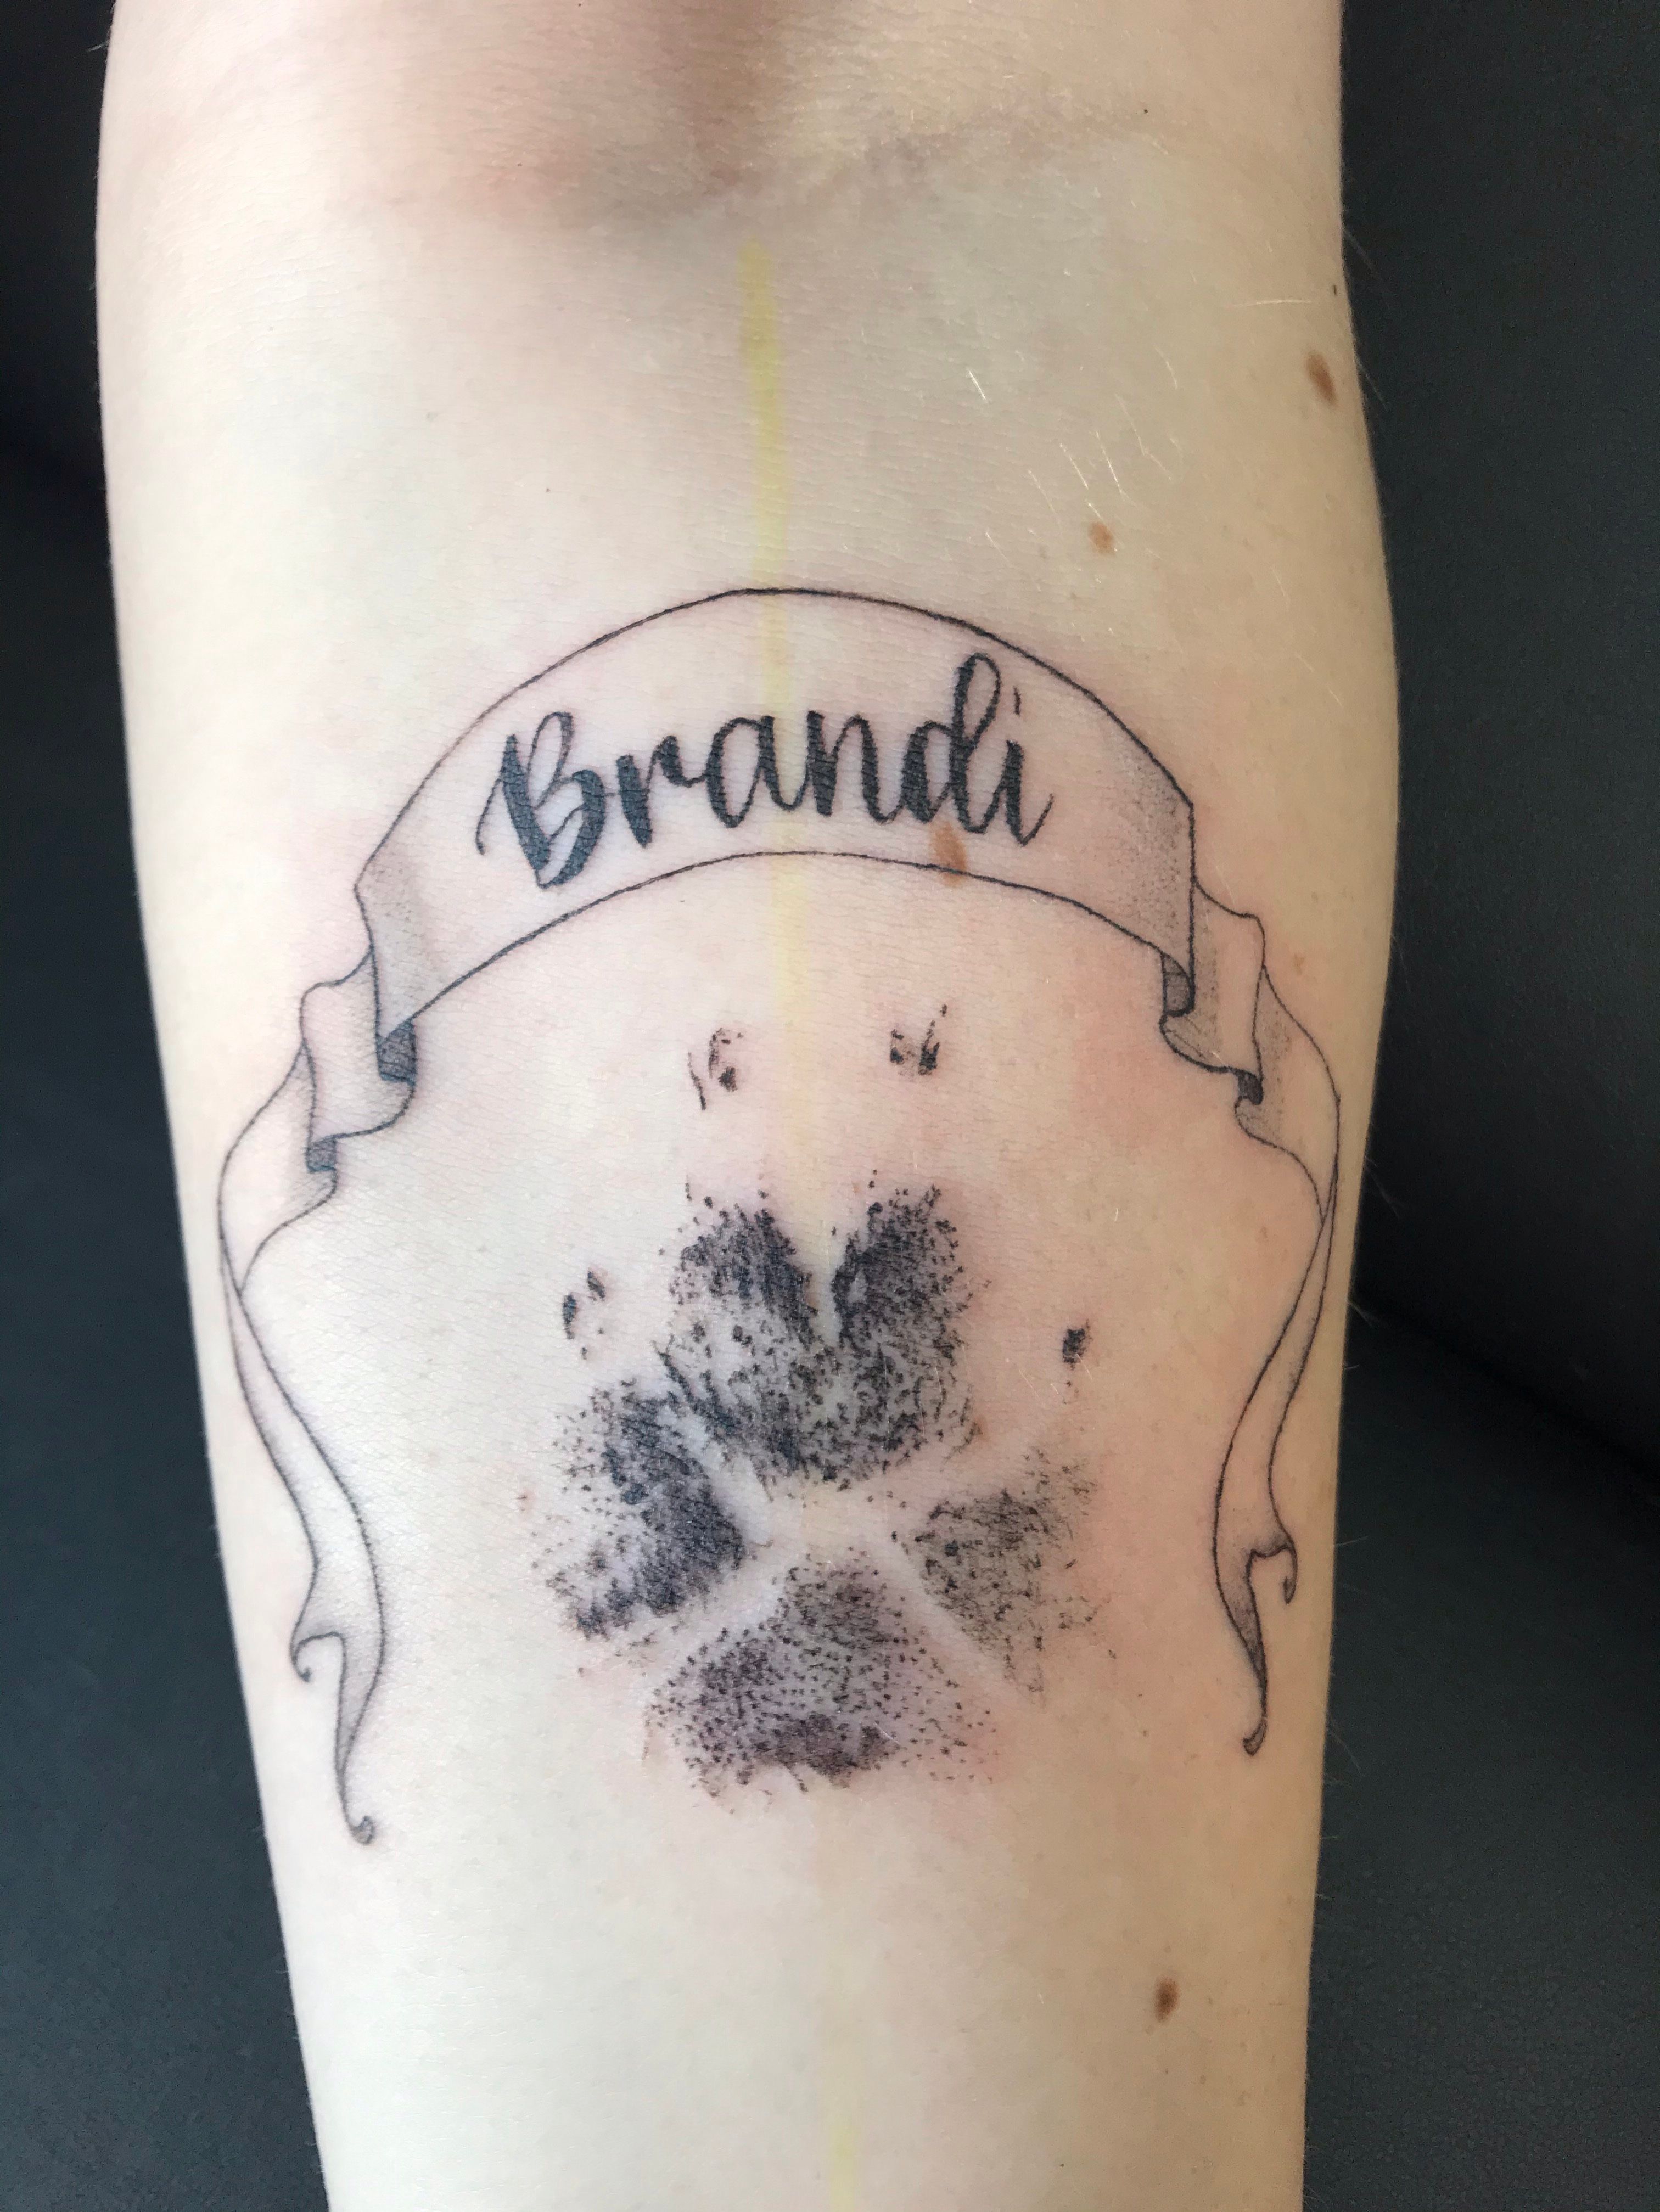 I got a tattoo of my dogs pawprint. I took an ink pad and stamped his foot  onto paper. The artist didn't tatto… | Dream tattoos, Tattoos and  piercings, Love tattoos